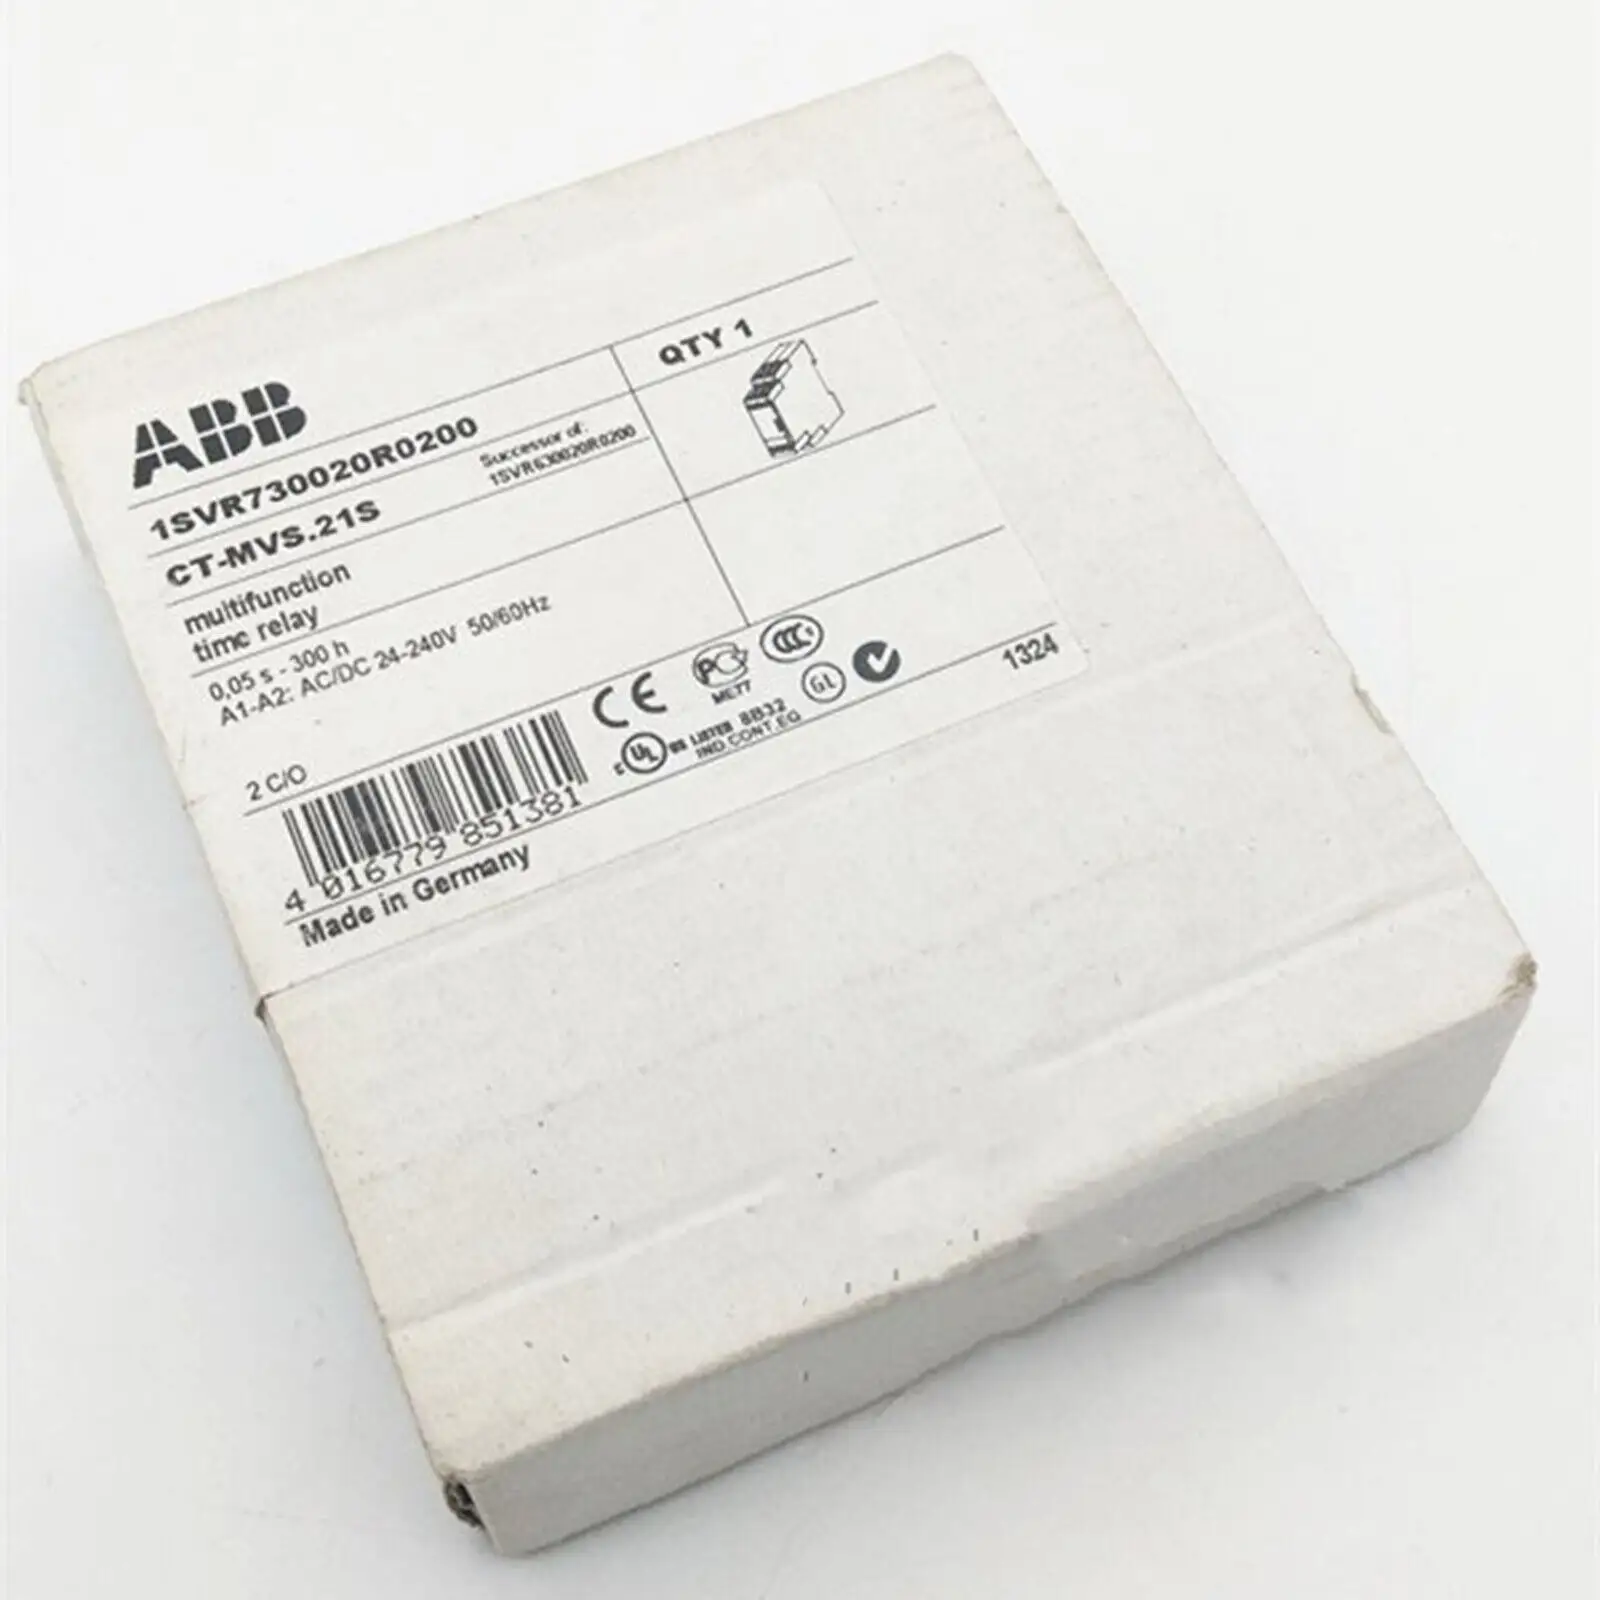 one new ABB CT-MVS.21S 1SVR730020R0200 Time Relay Fast Shipping CT-MVS.21S